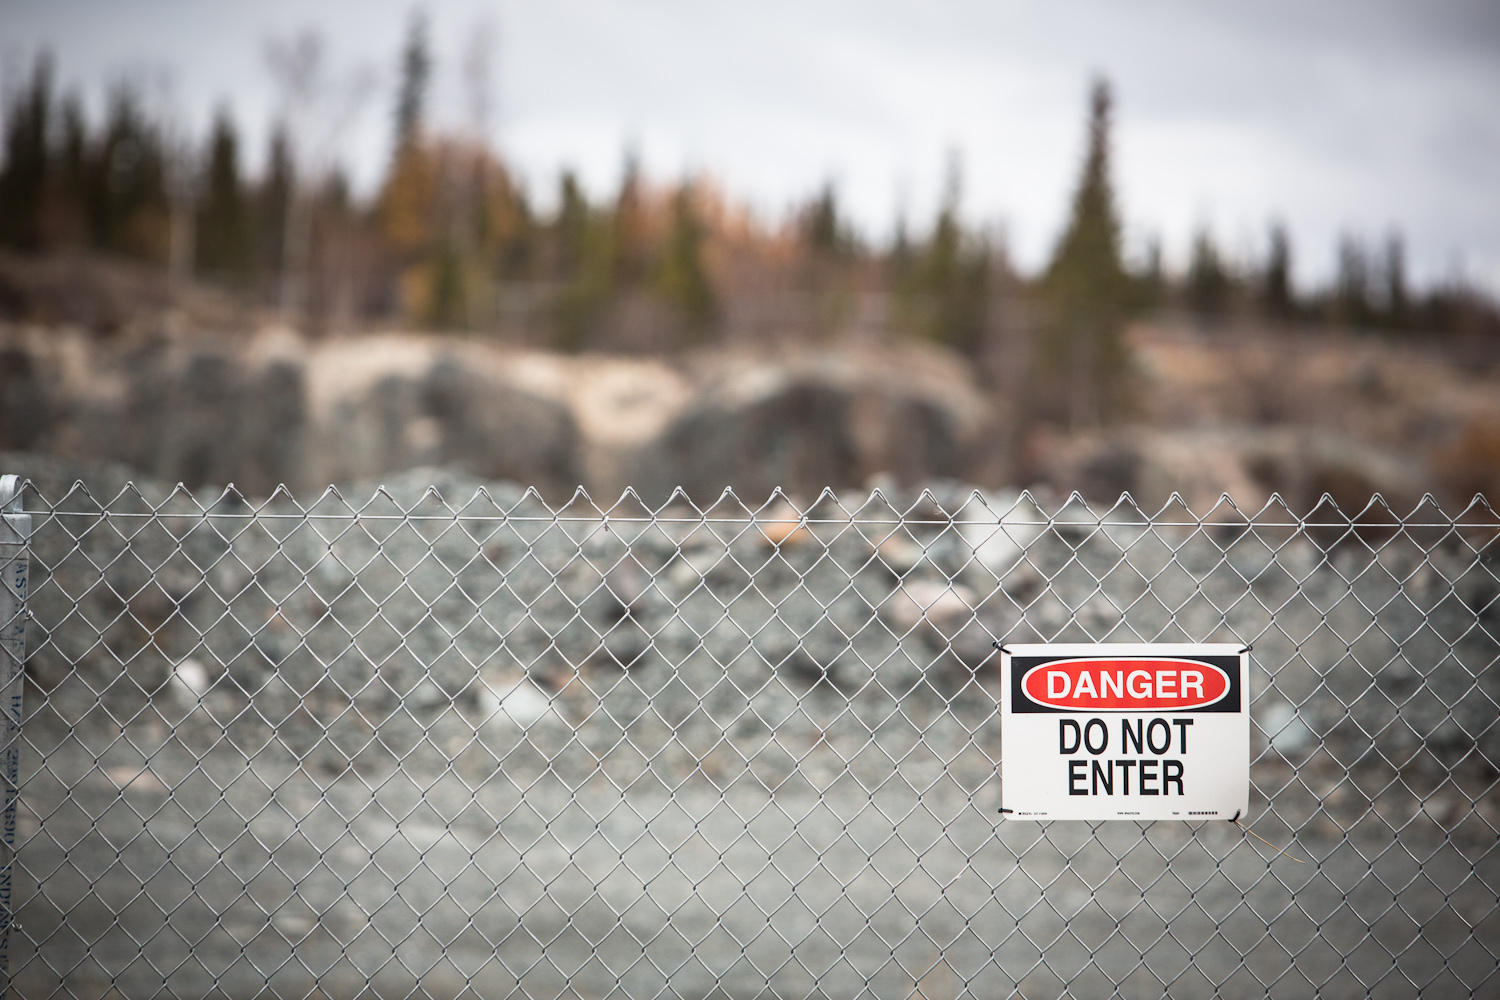 This picture shows a chain link fence with a sign on it that says 'Danger Do Not Enter'. 